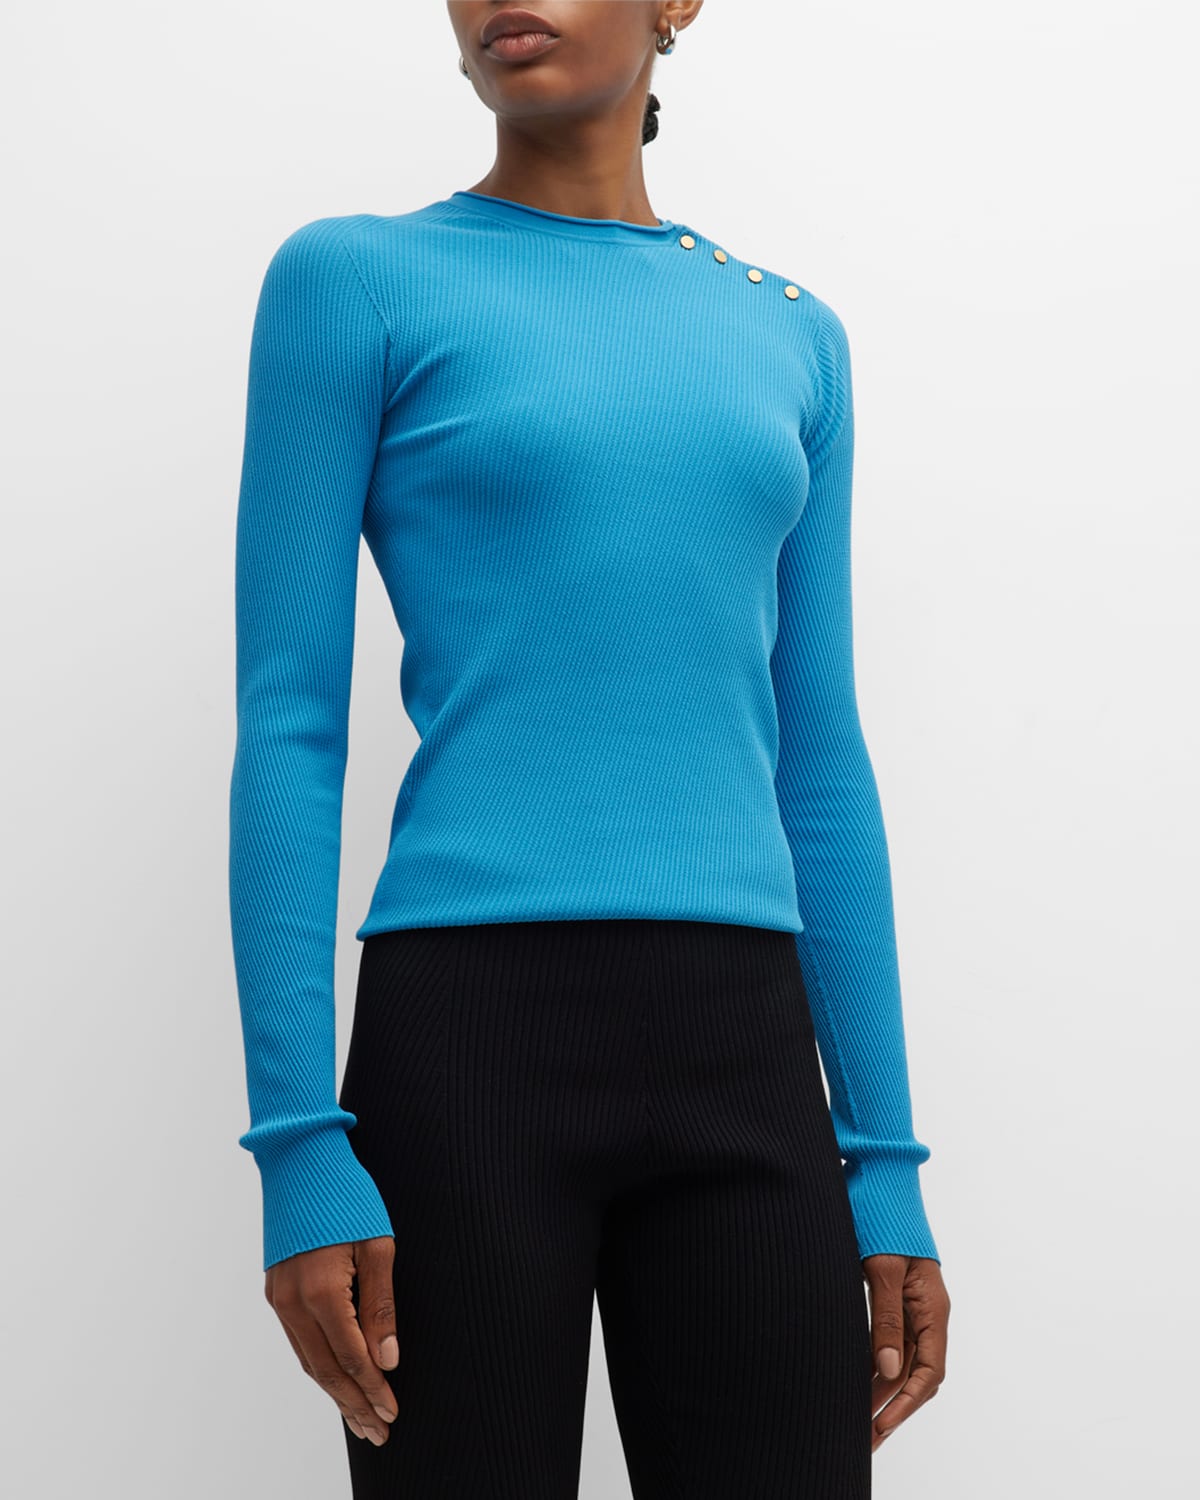 Giorgio Armani Knit Top W/ Snap Button Detail In Turquoise